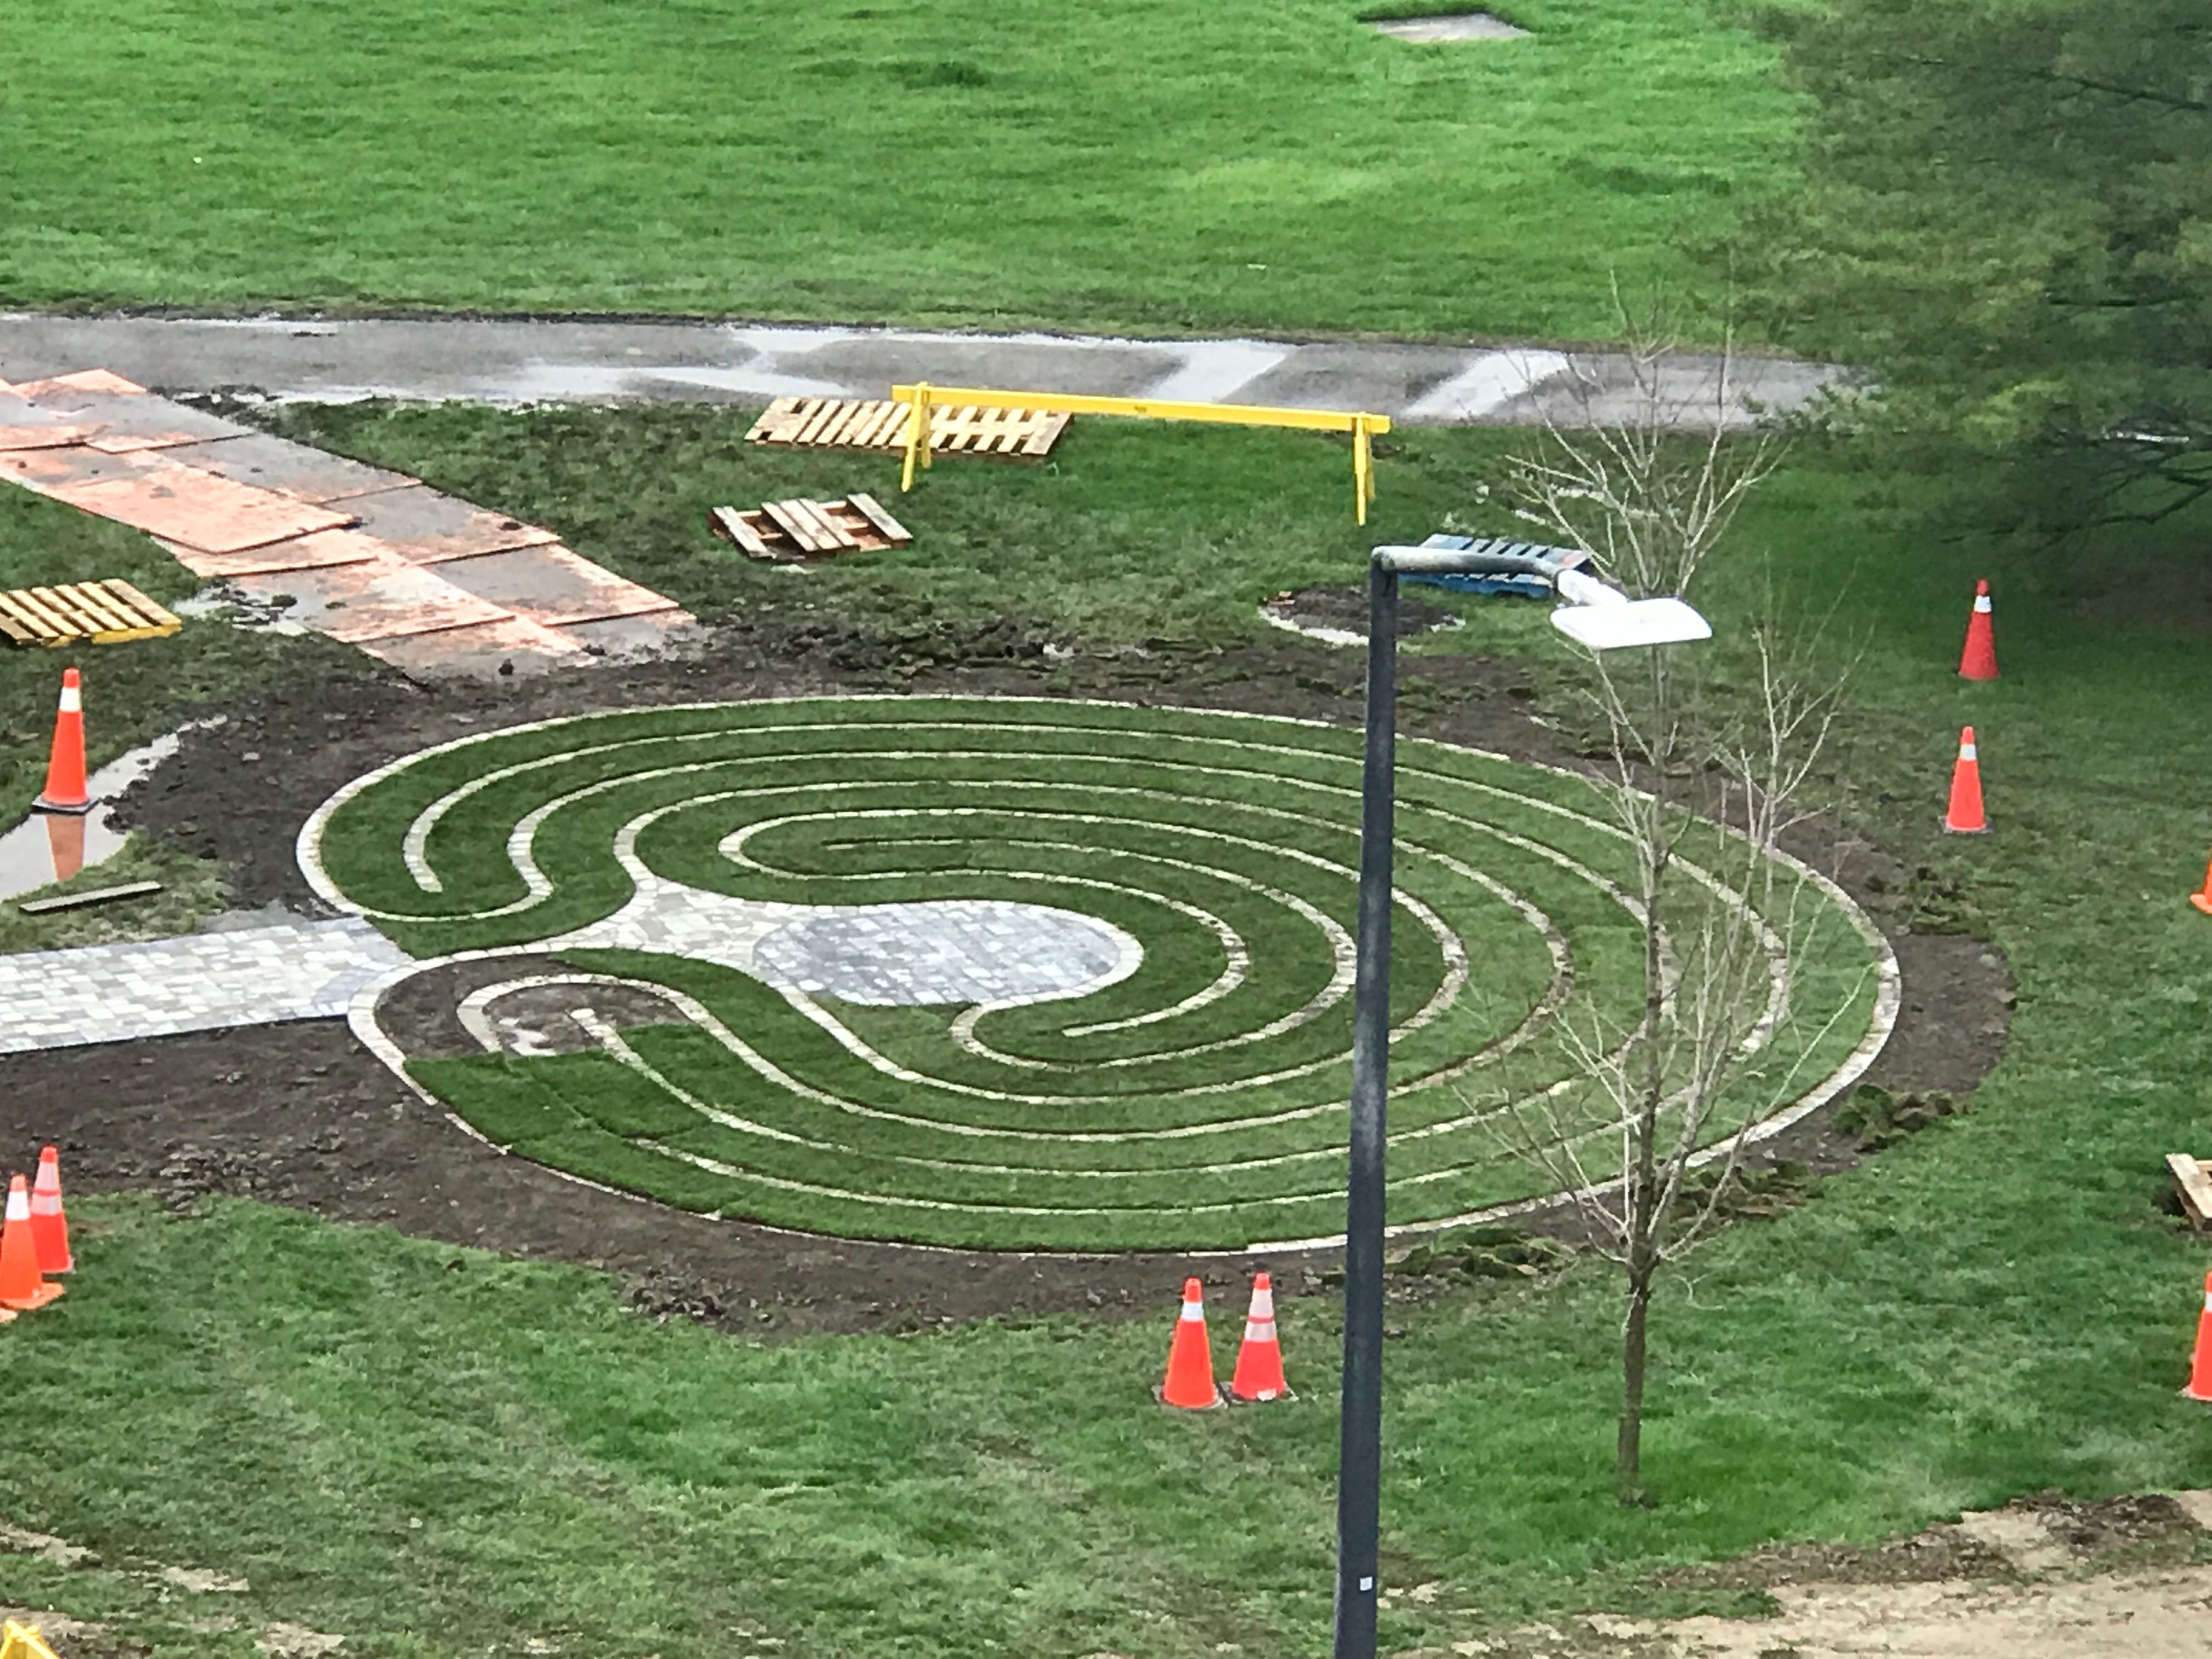 Labyrinth almost completed